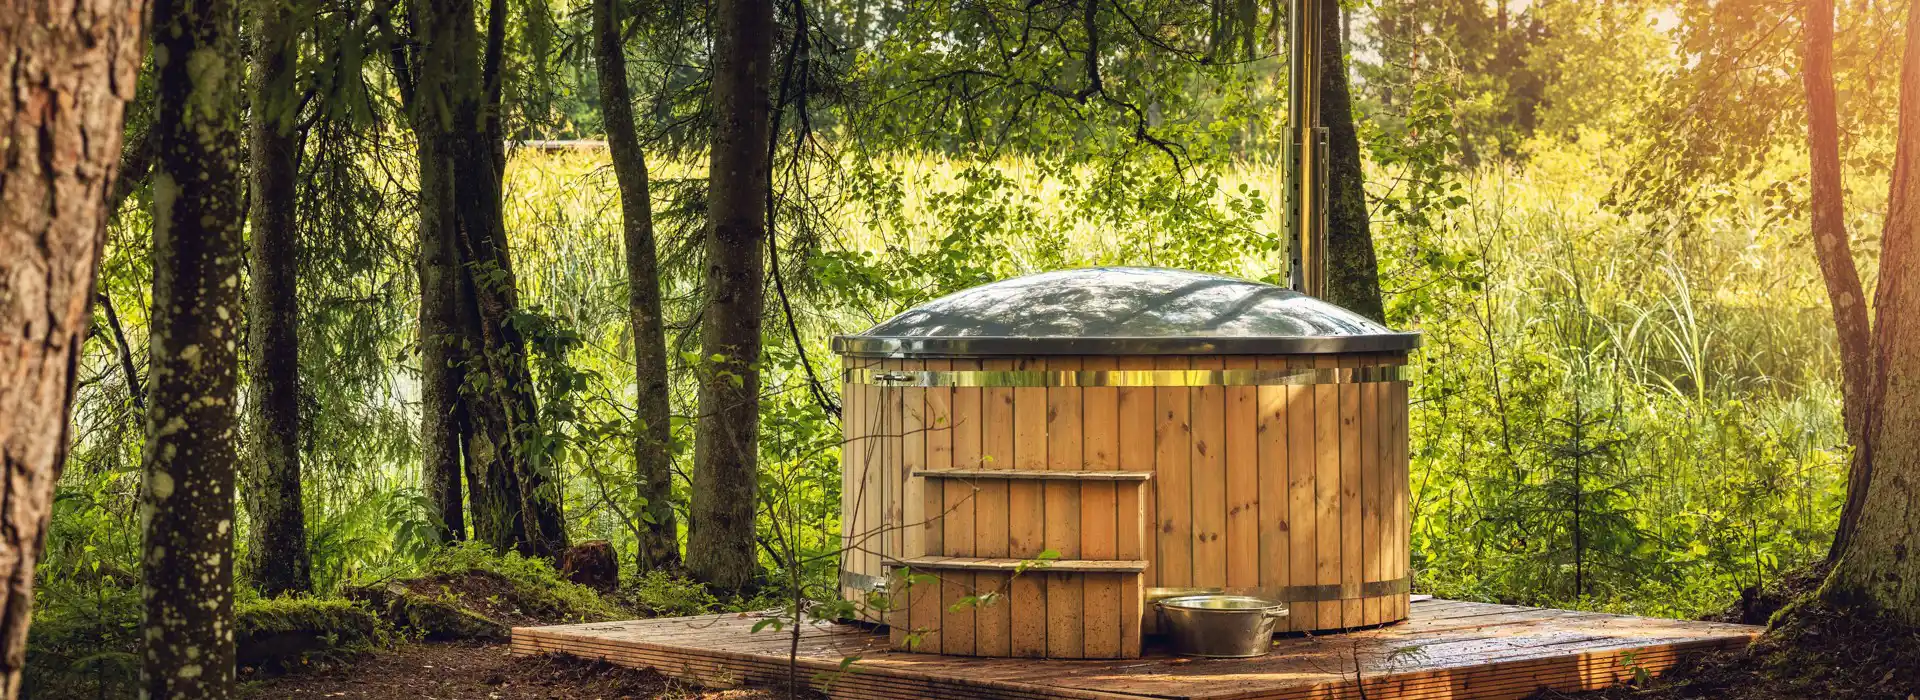 Glamping with hot tubs in North West England